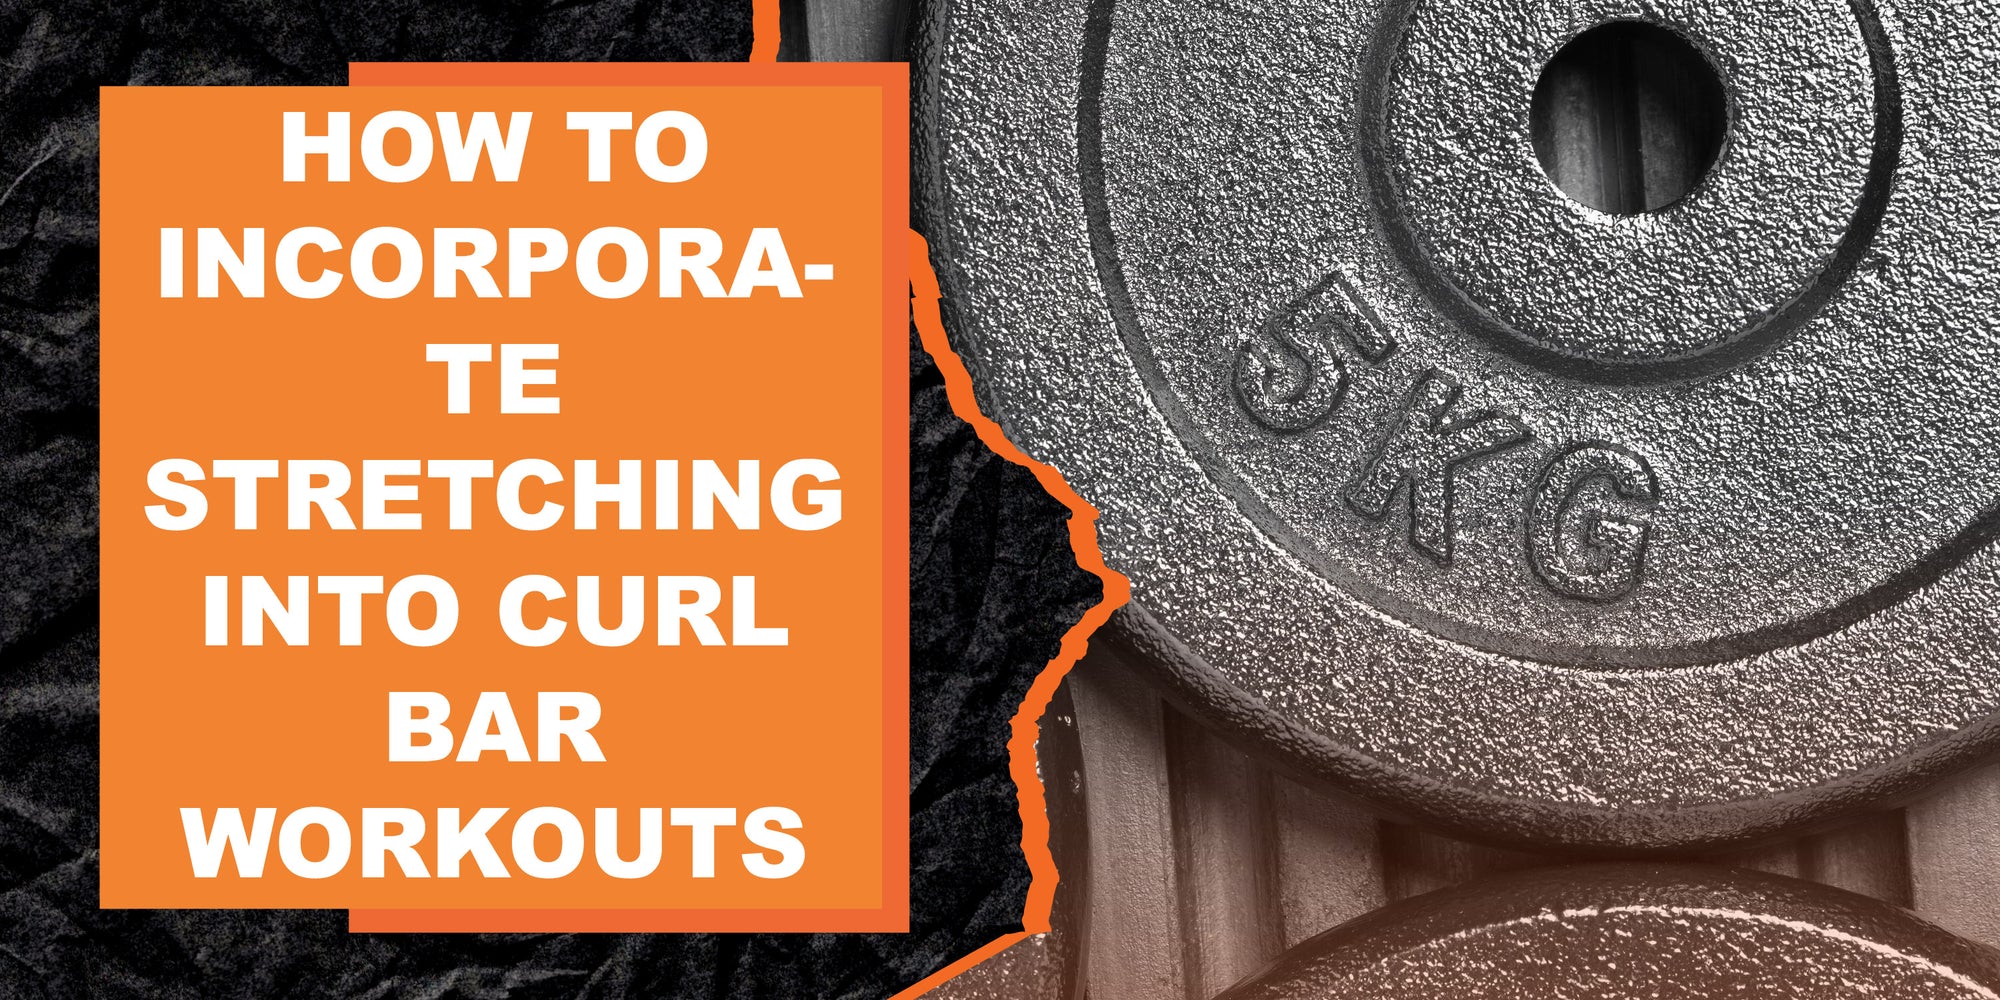 How to Incorporate Stretching Into Curl Bar Workouts